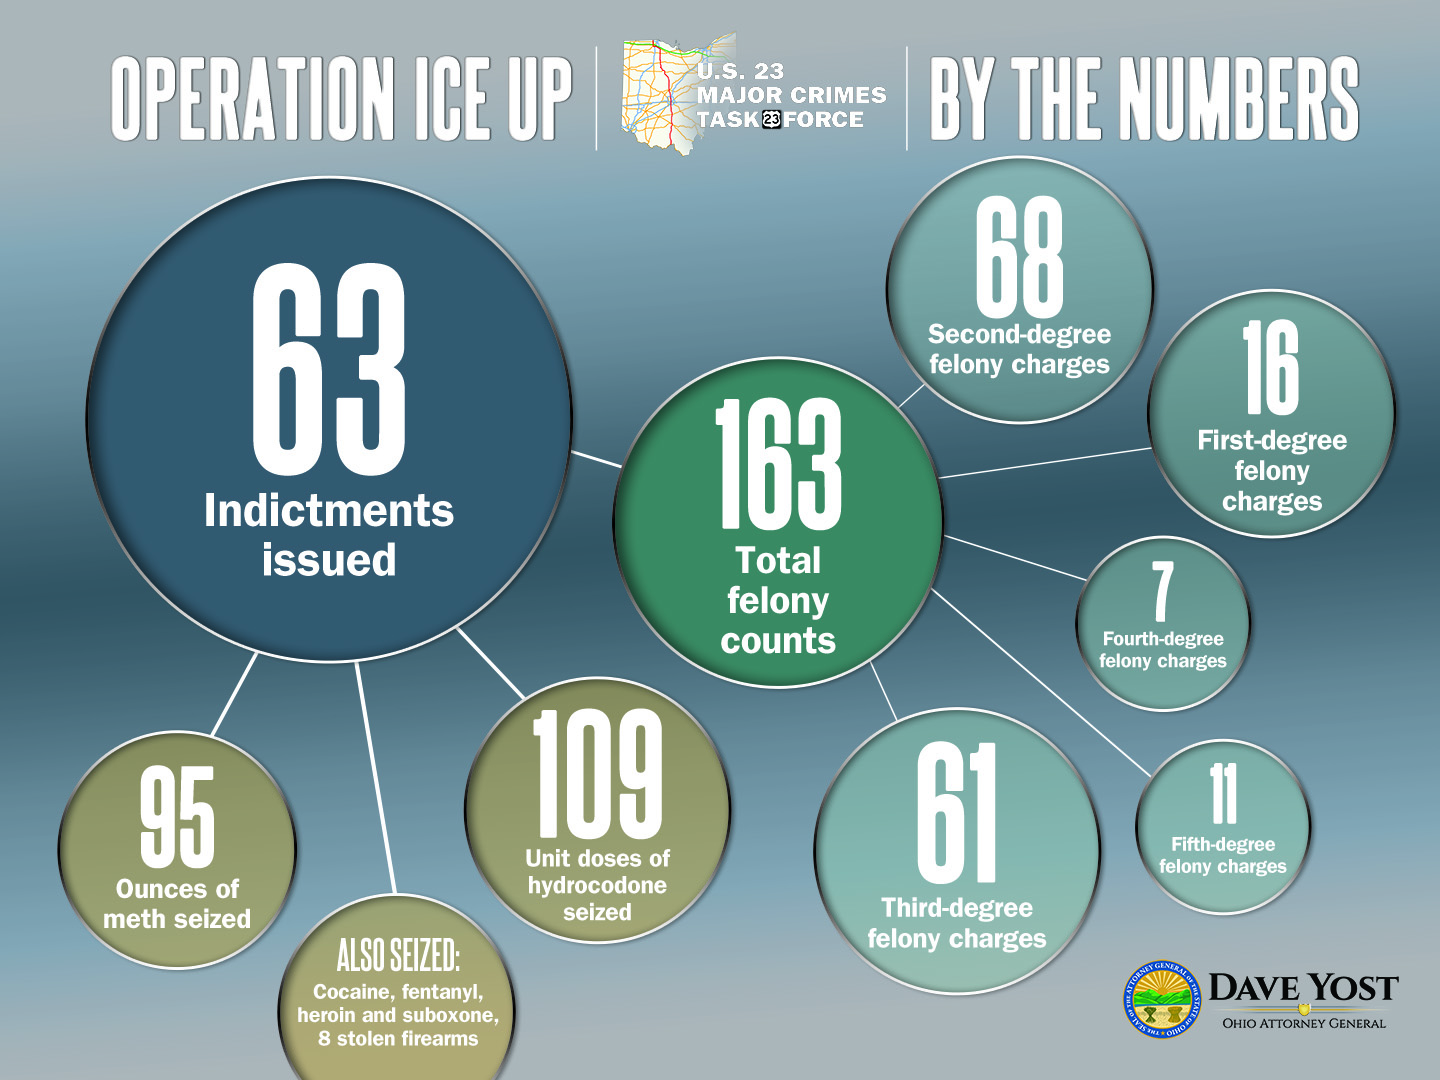 Operation Ice Up; U.S. 23 Major Crimes Task Force; By the Numbers; 63 indictments issued; 163 total felony counts; 68 second-degree felony charges; 16 first-degree felony charges; 7 fourth-degree felony charges; 61 third-degree felony charges; 11 fifth-degree felony charges; 95 ounces of meth seized; 109 unit doses of hydrocodone seized; Also Seized: Cocaine, fentanyl, heroin and suboxone, 8 stolen firearms. Dave Yost, Ohio Attorney General